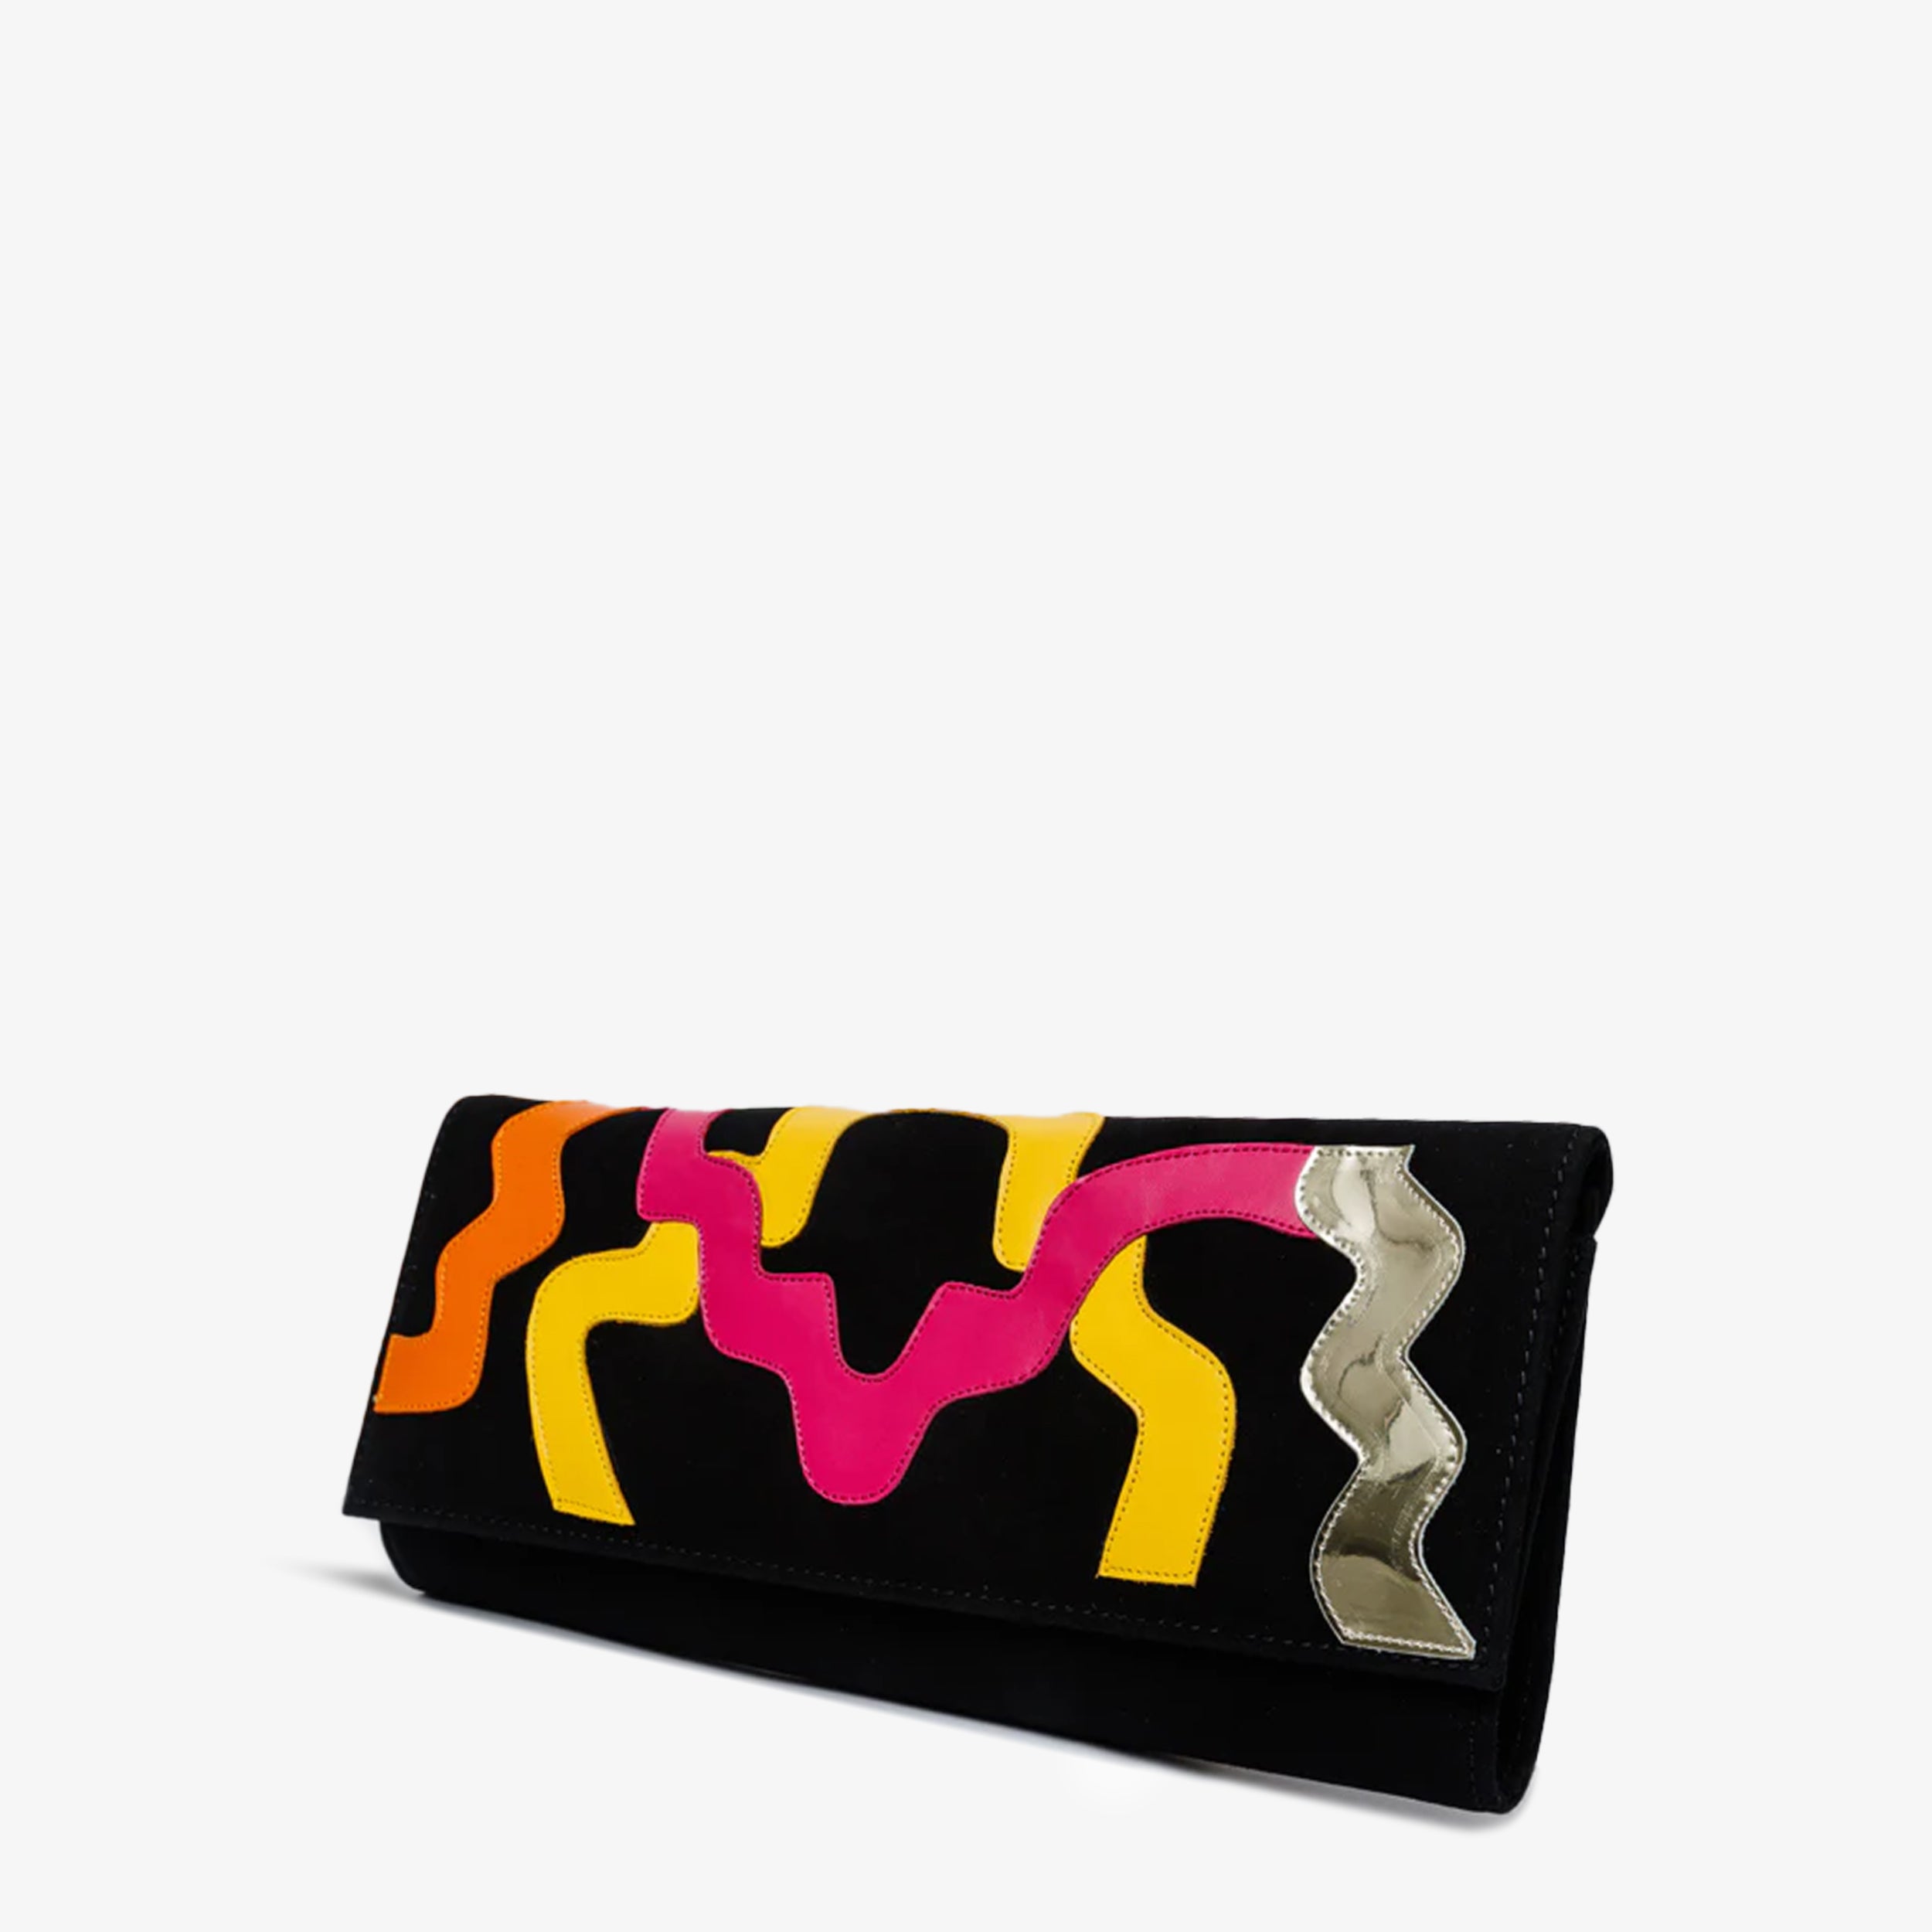 The Tario Black Suede Leather Clutch